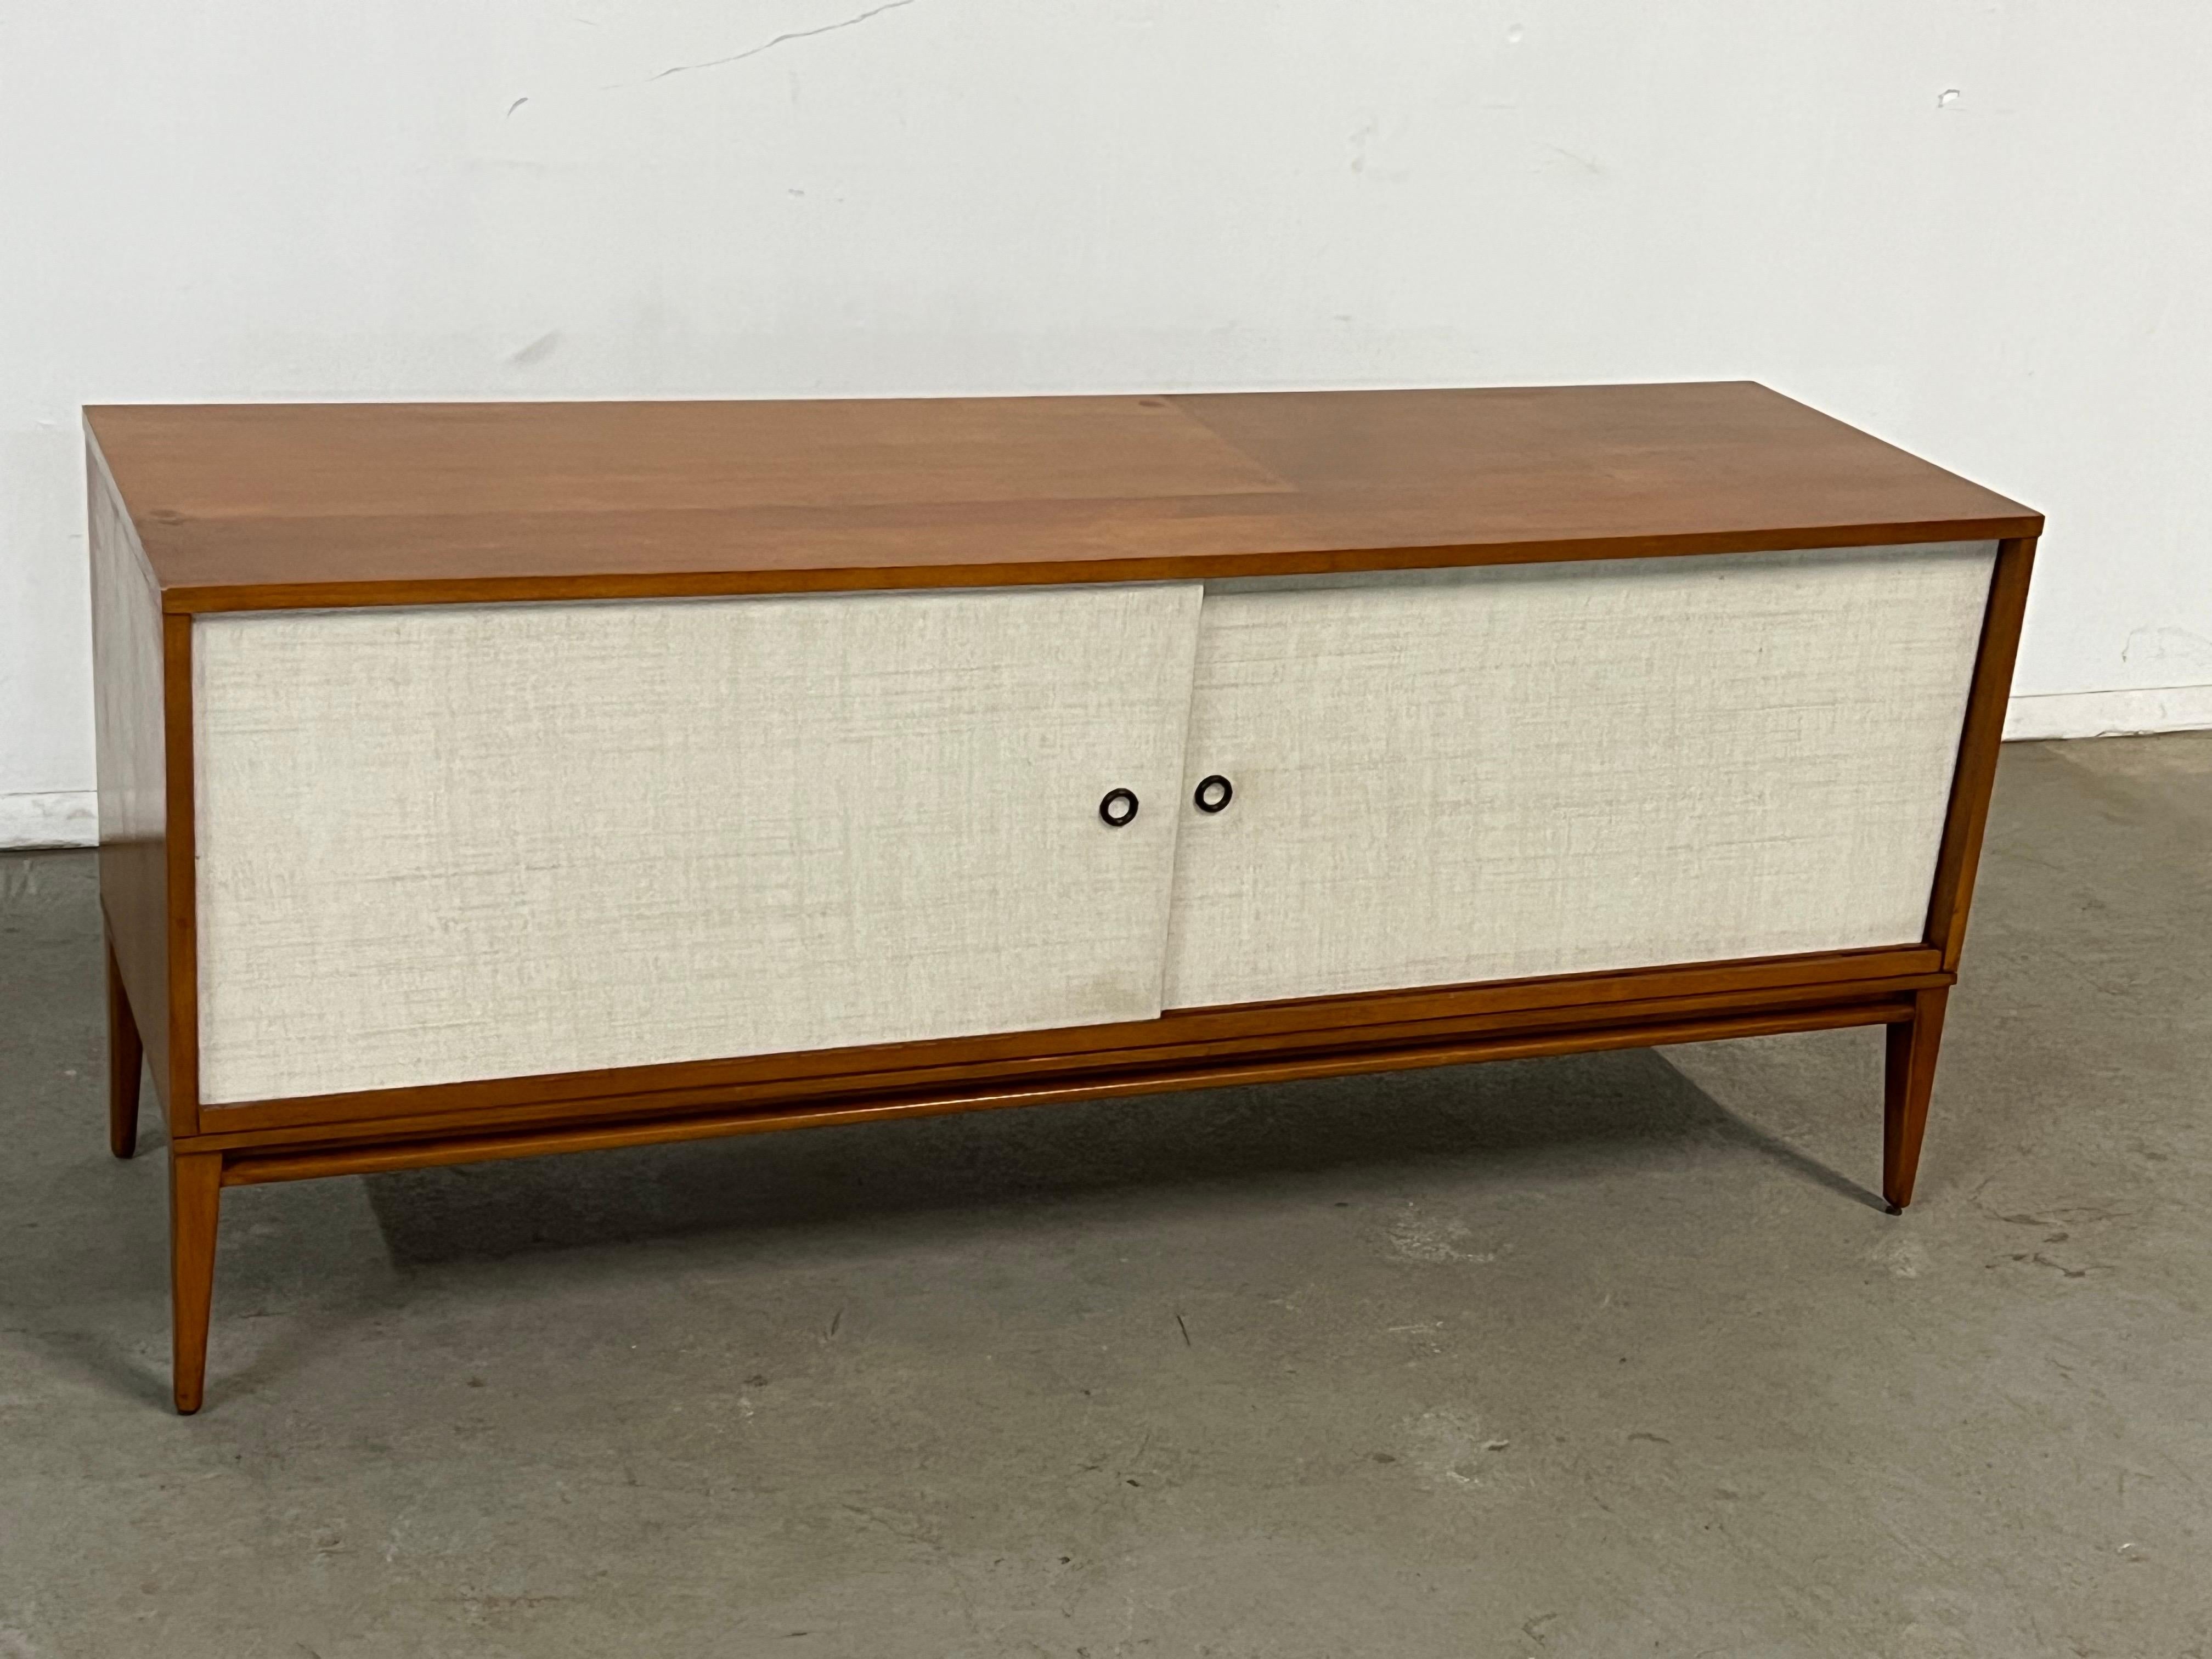 Mid-Century Modern Paul McCobb Credenza/Media Console

Offered is a vintage credenza designed by Paul McCobb for Planner Group. Features sliding doors and adjustable shelving inside. Perfect for any space or design project. the height makes the